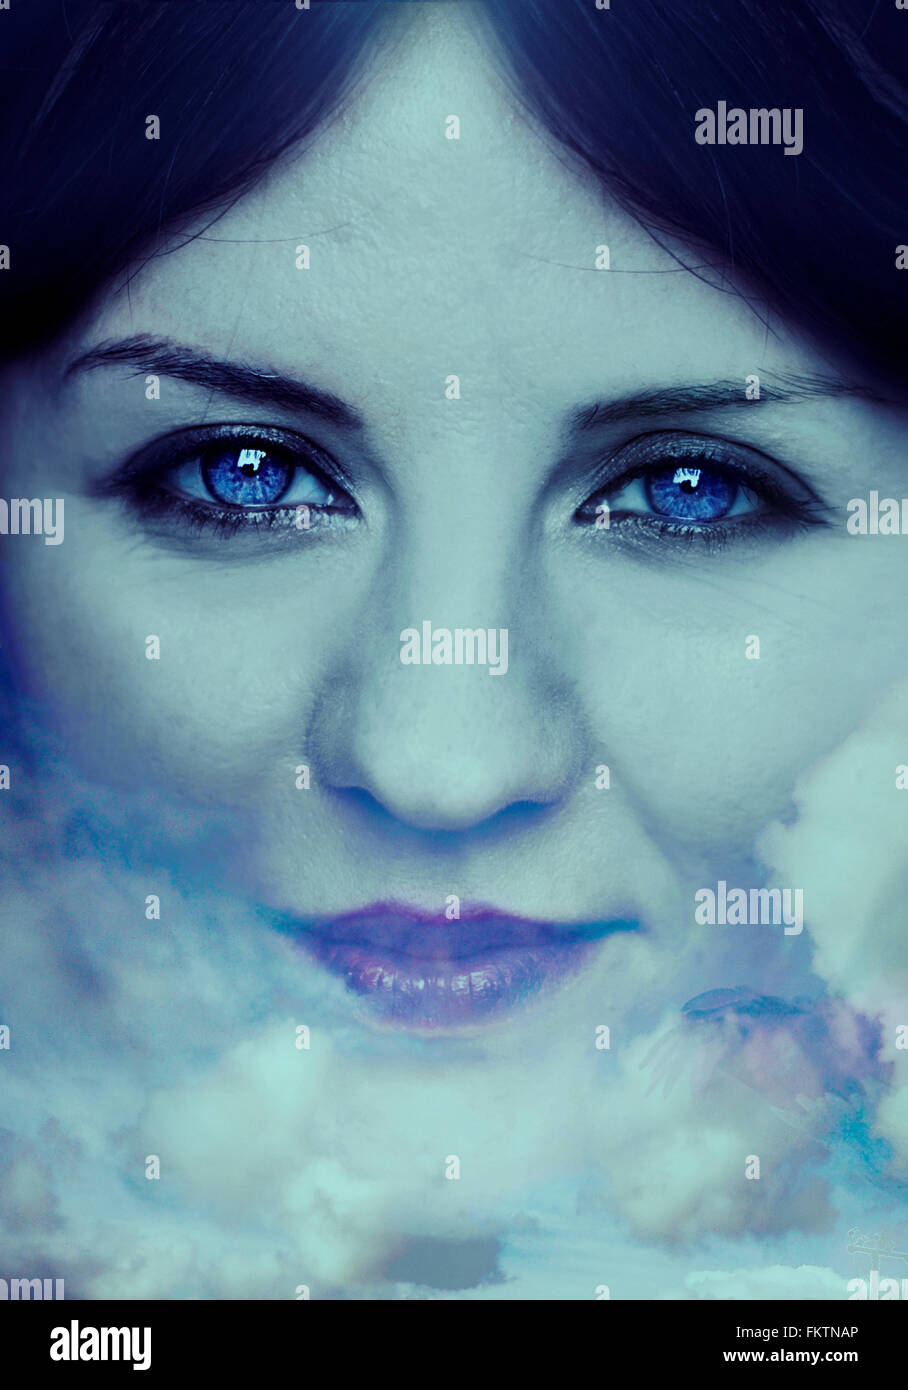 artistic portrait of a woman in blue Stock Photo